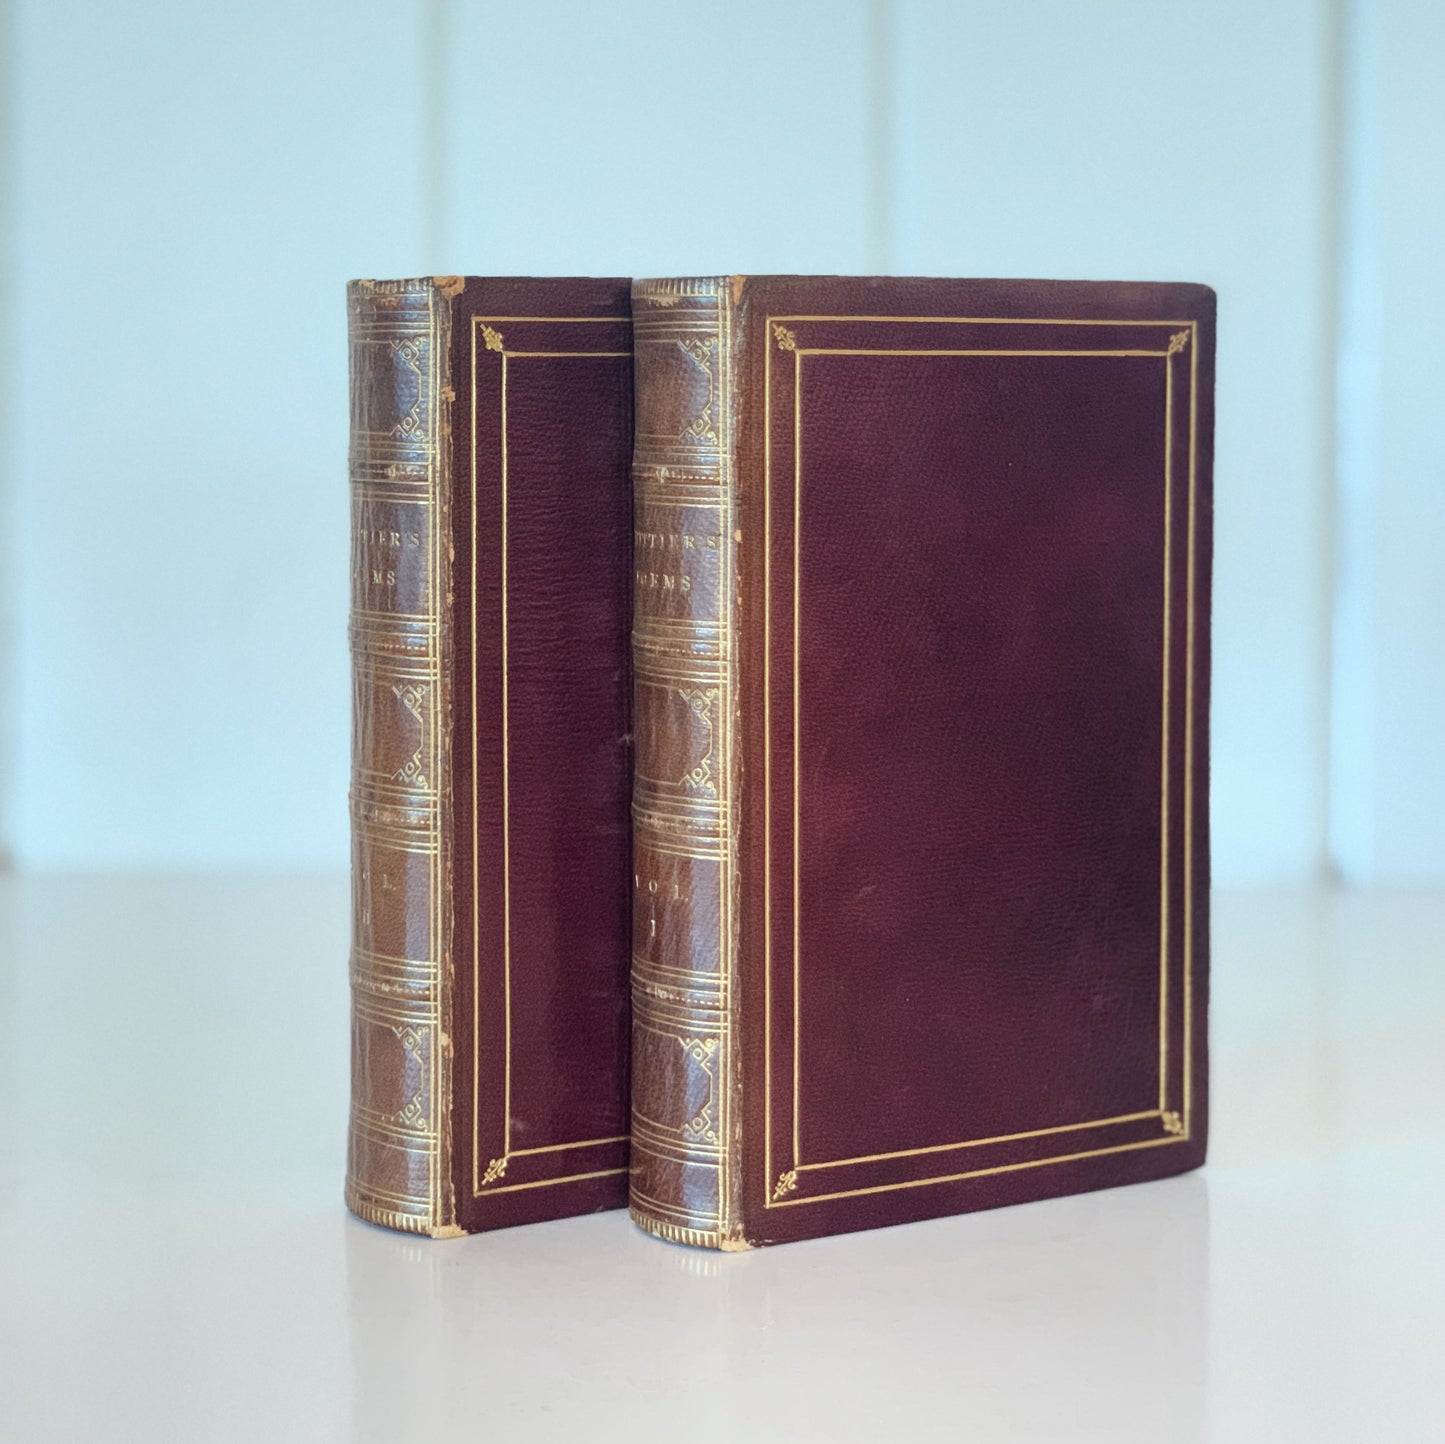 The Poetical Works of John Greenleaf Whittier, 1864, Complete in Two Volumes, Ticknor & Fields, Leather